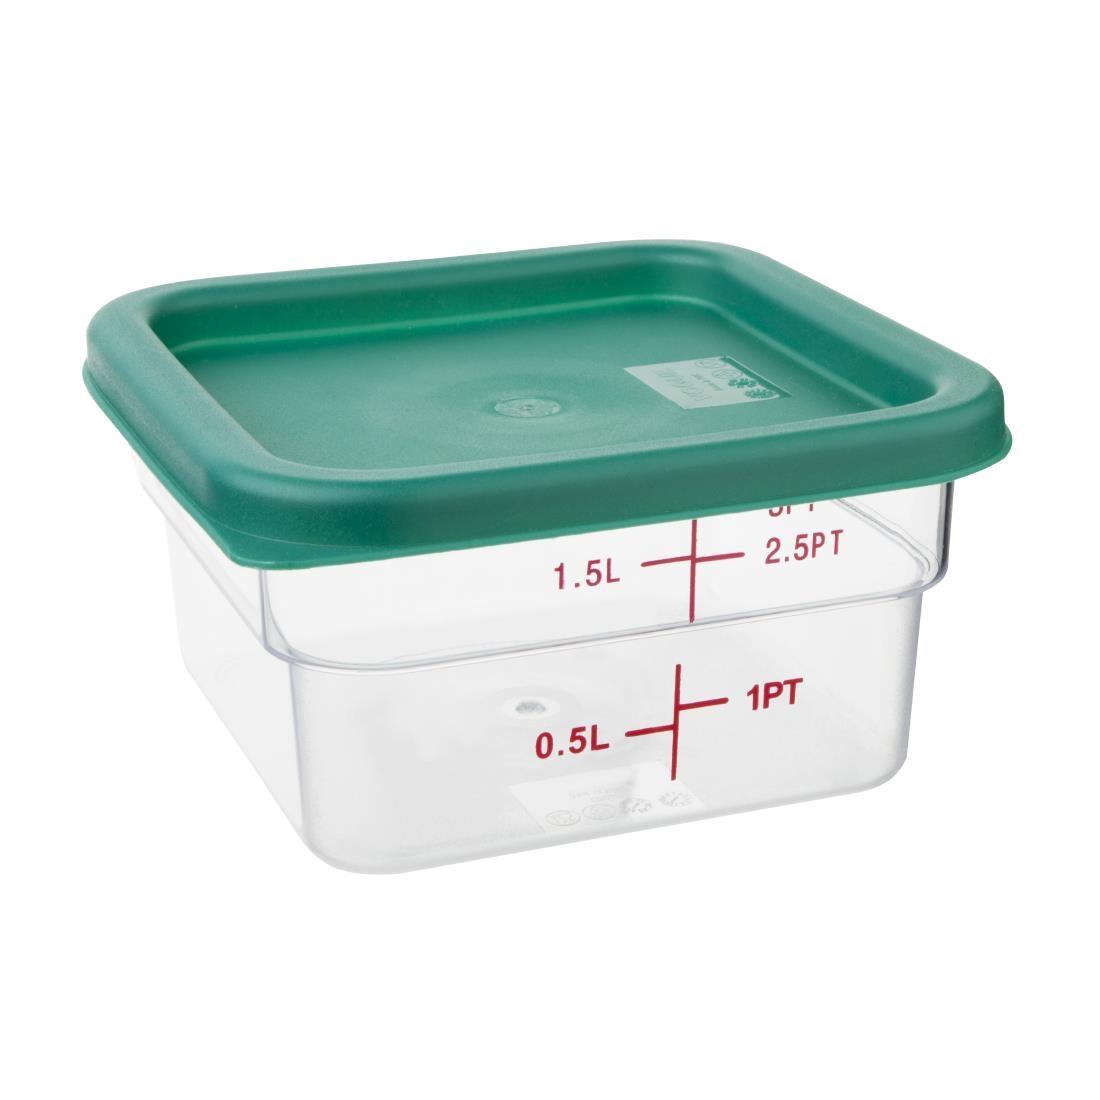 Hygiplas Polycarbonate Square Food Storage Container Lid Green Small - CF046  - 5